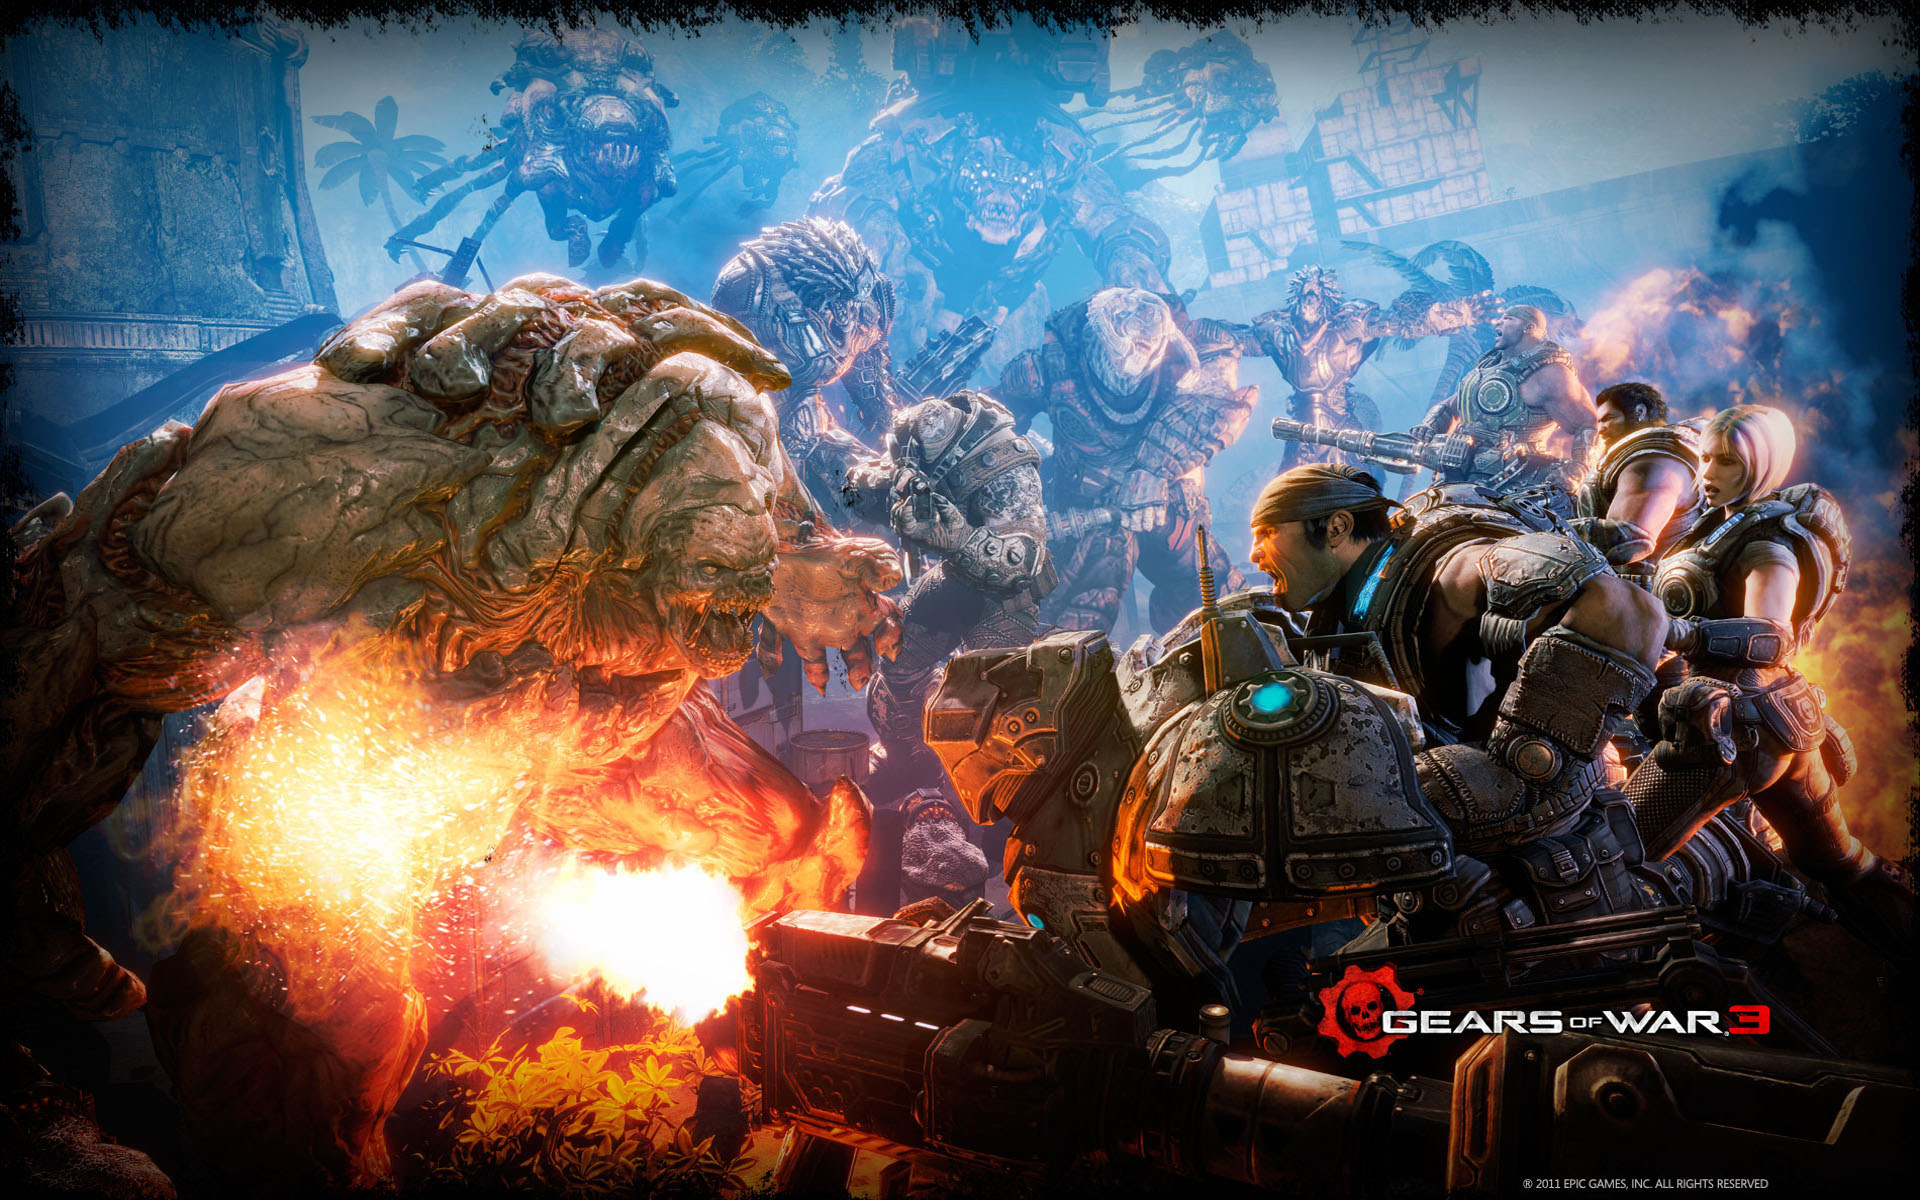  Resolution Wallpapers Pictures Gears of War 3 Wallpapers 1920x1200 1920x1200